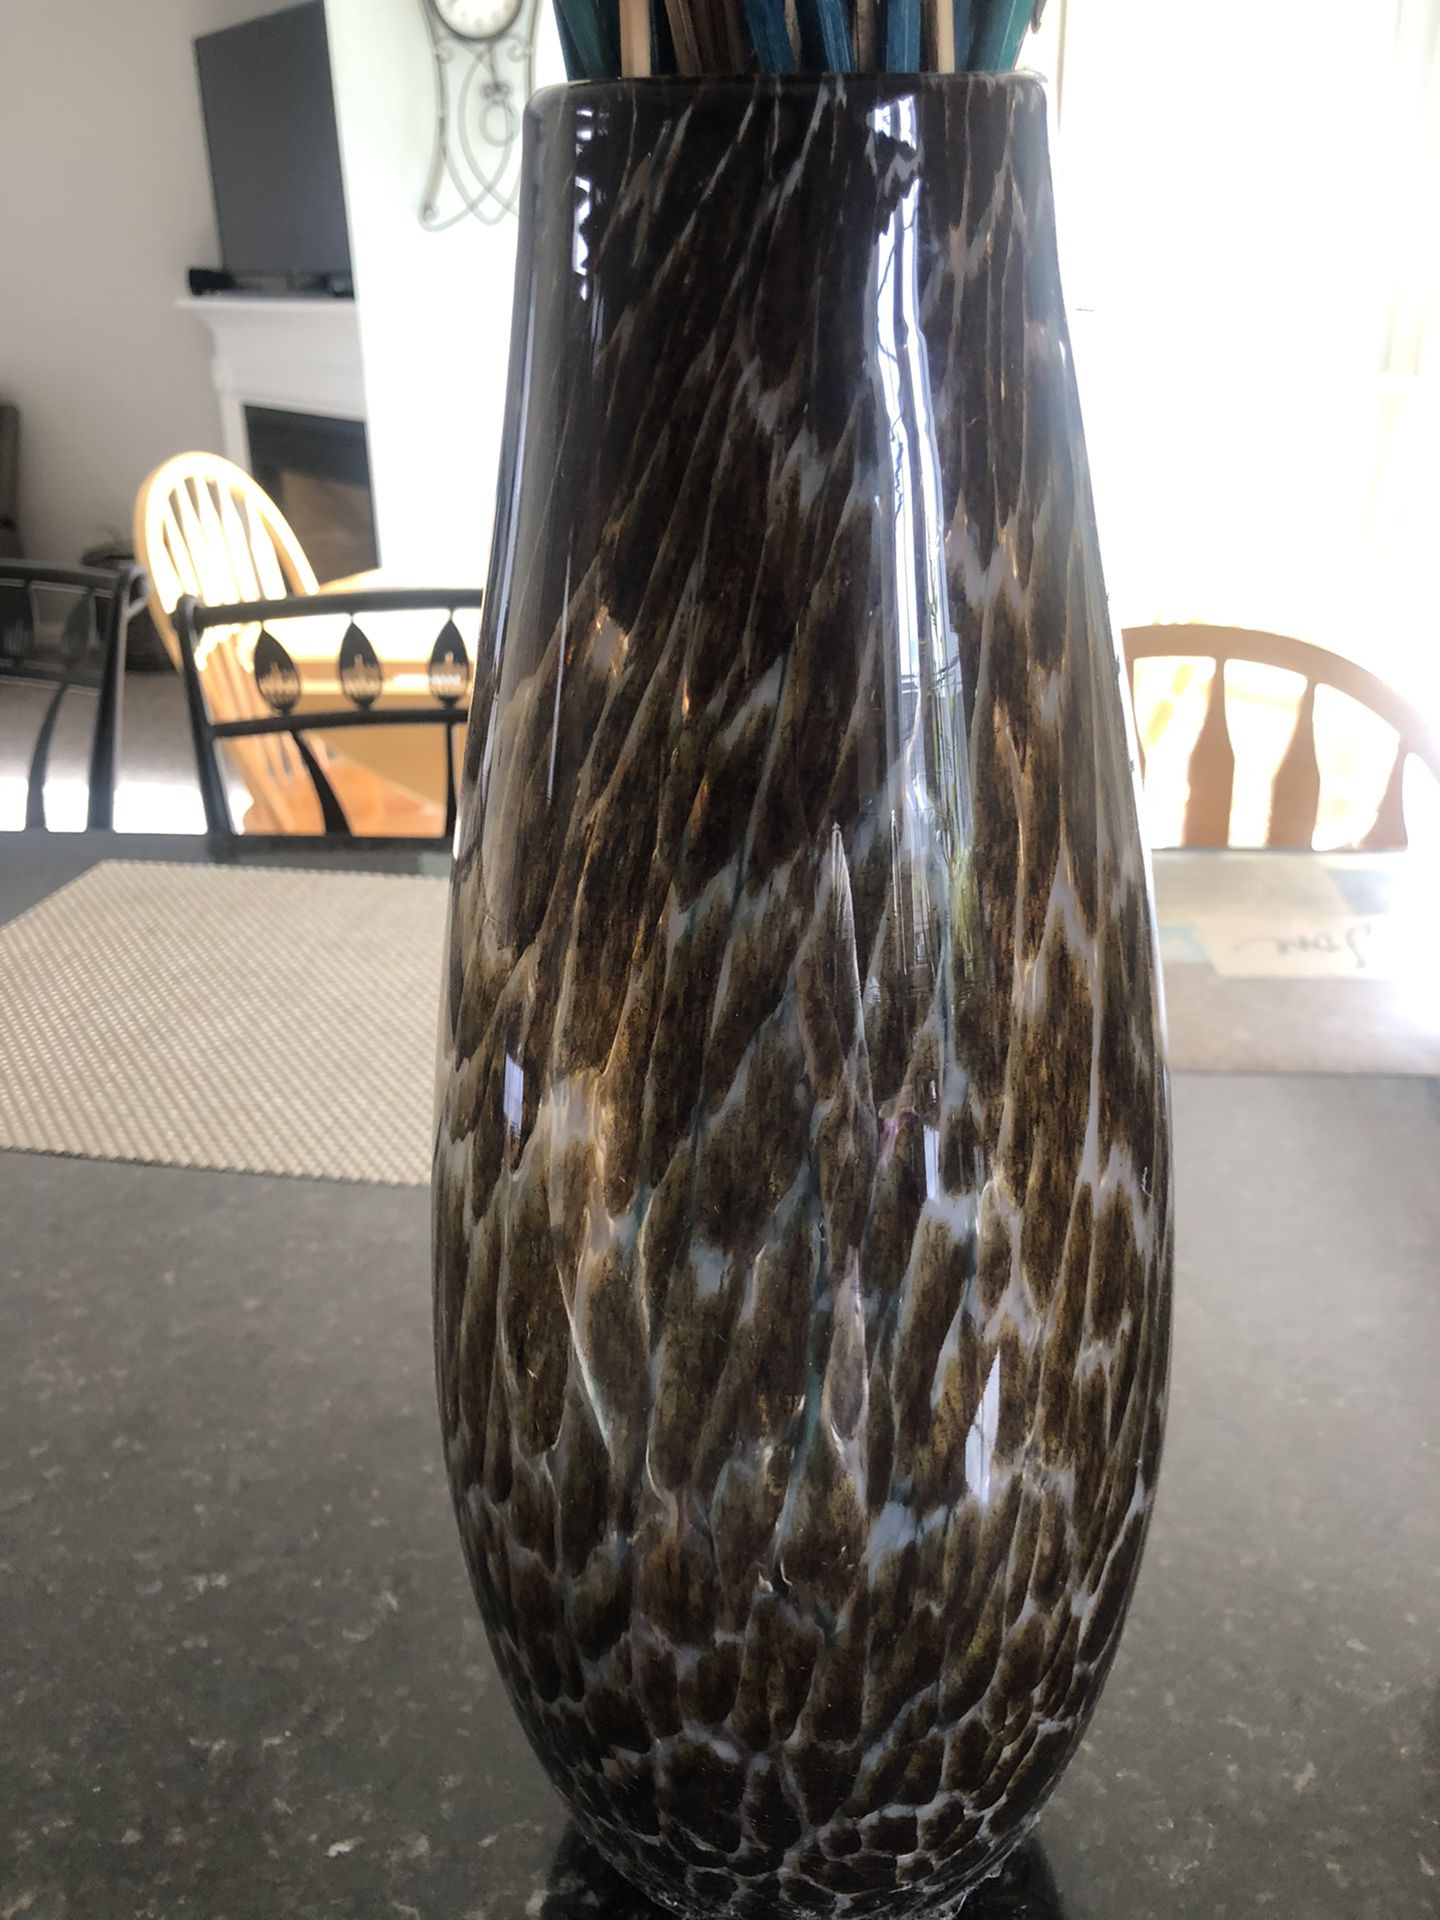 Beautiful Sturdy Vase For Sale!